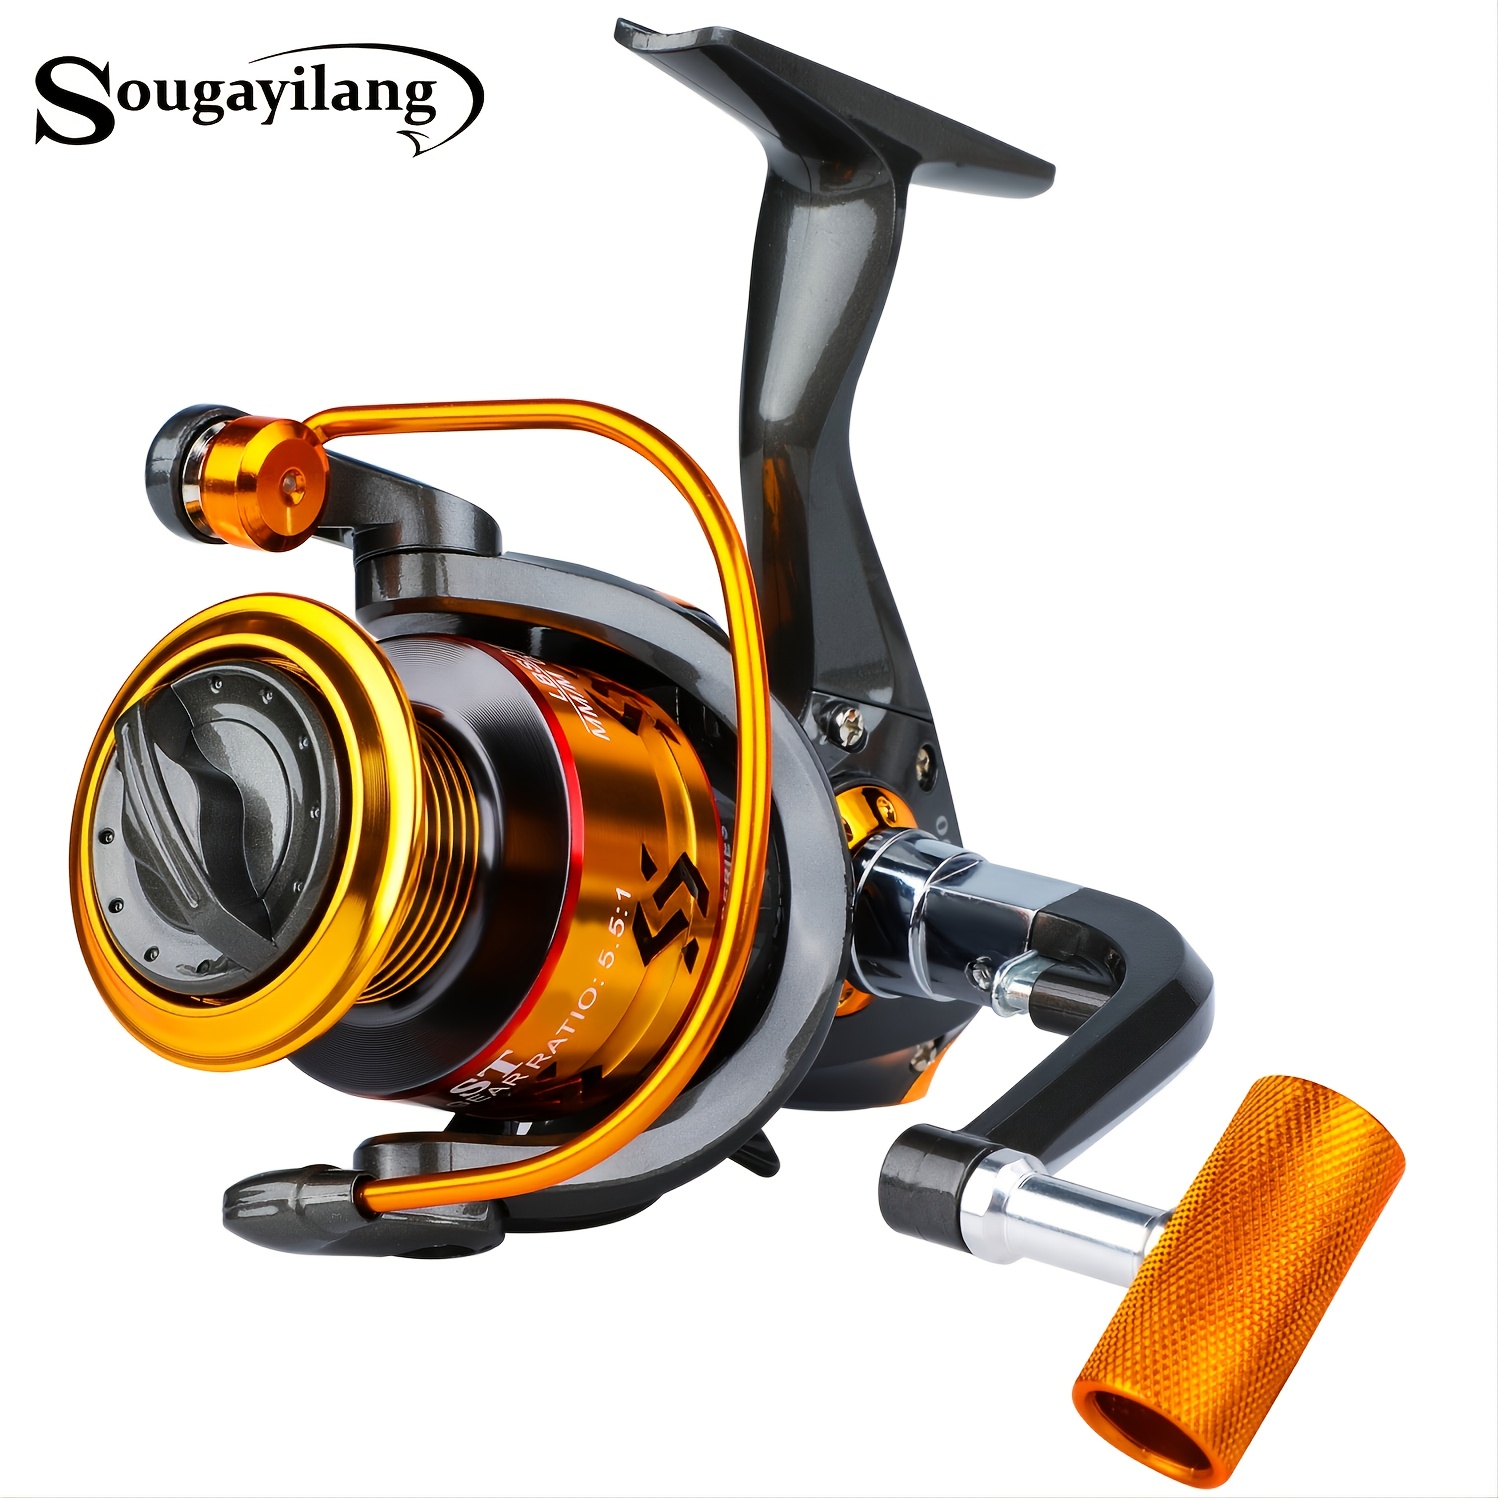 Sougayilang 12BB Spinning Fishing Reel - Lightweight, Durable, And Smooth  Operation For Freshwater And Saltwater Fishing